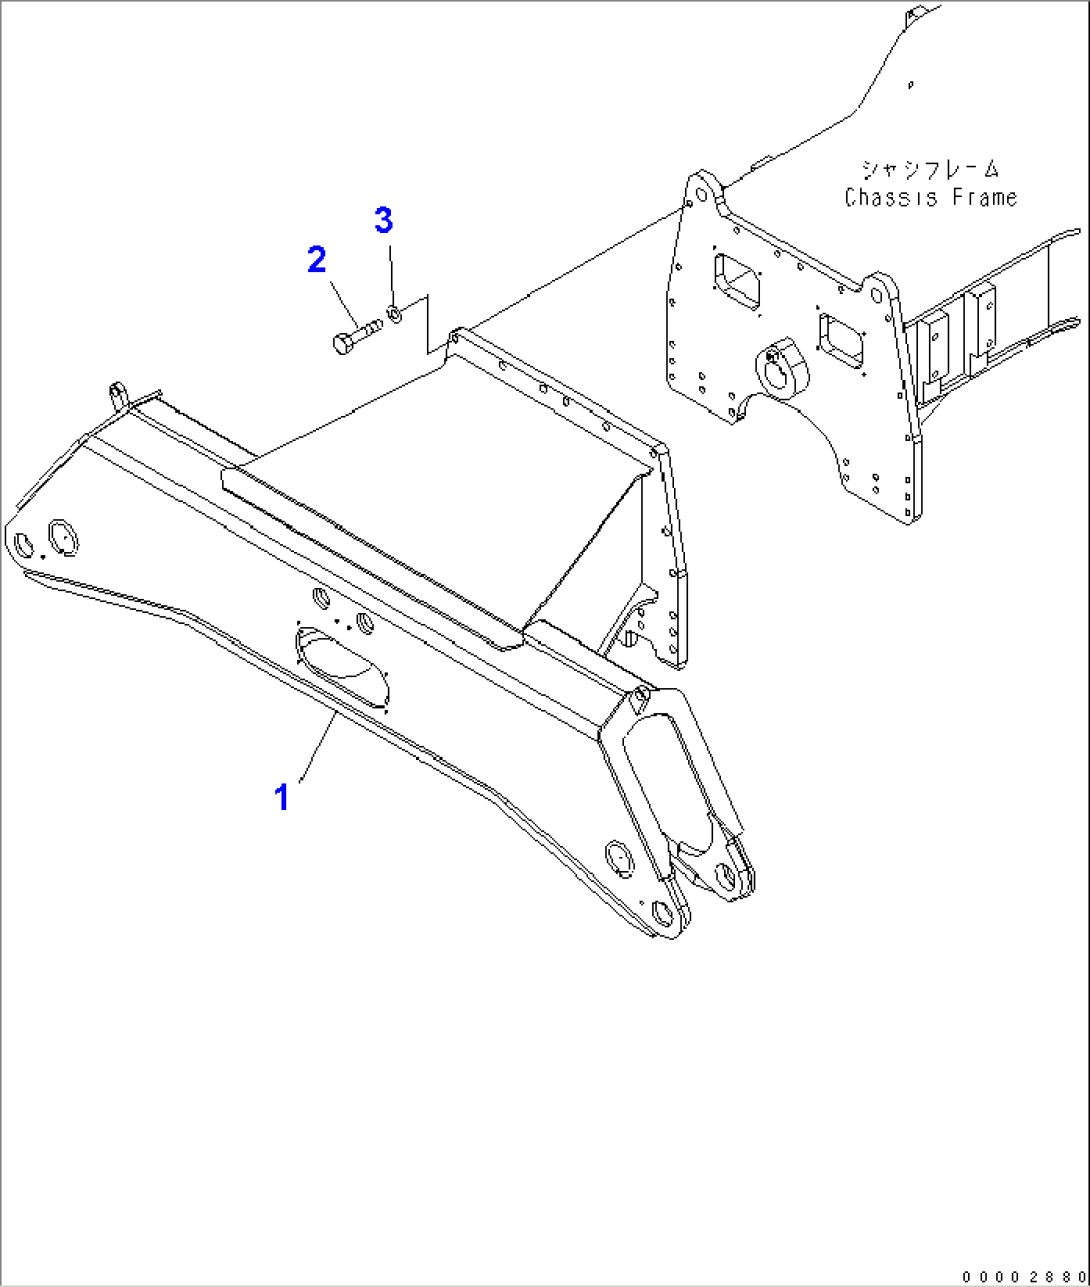 FRONT FRAME (FOR 2.75M WIDTH FRONT OUTRIGGER)